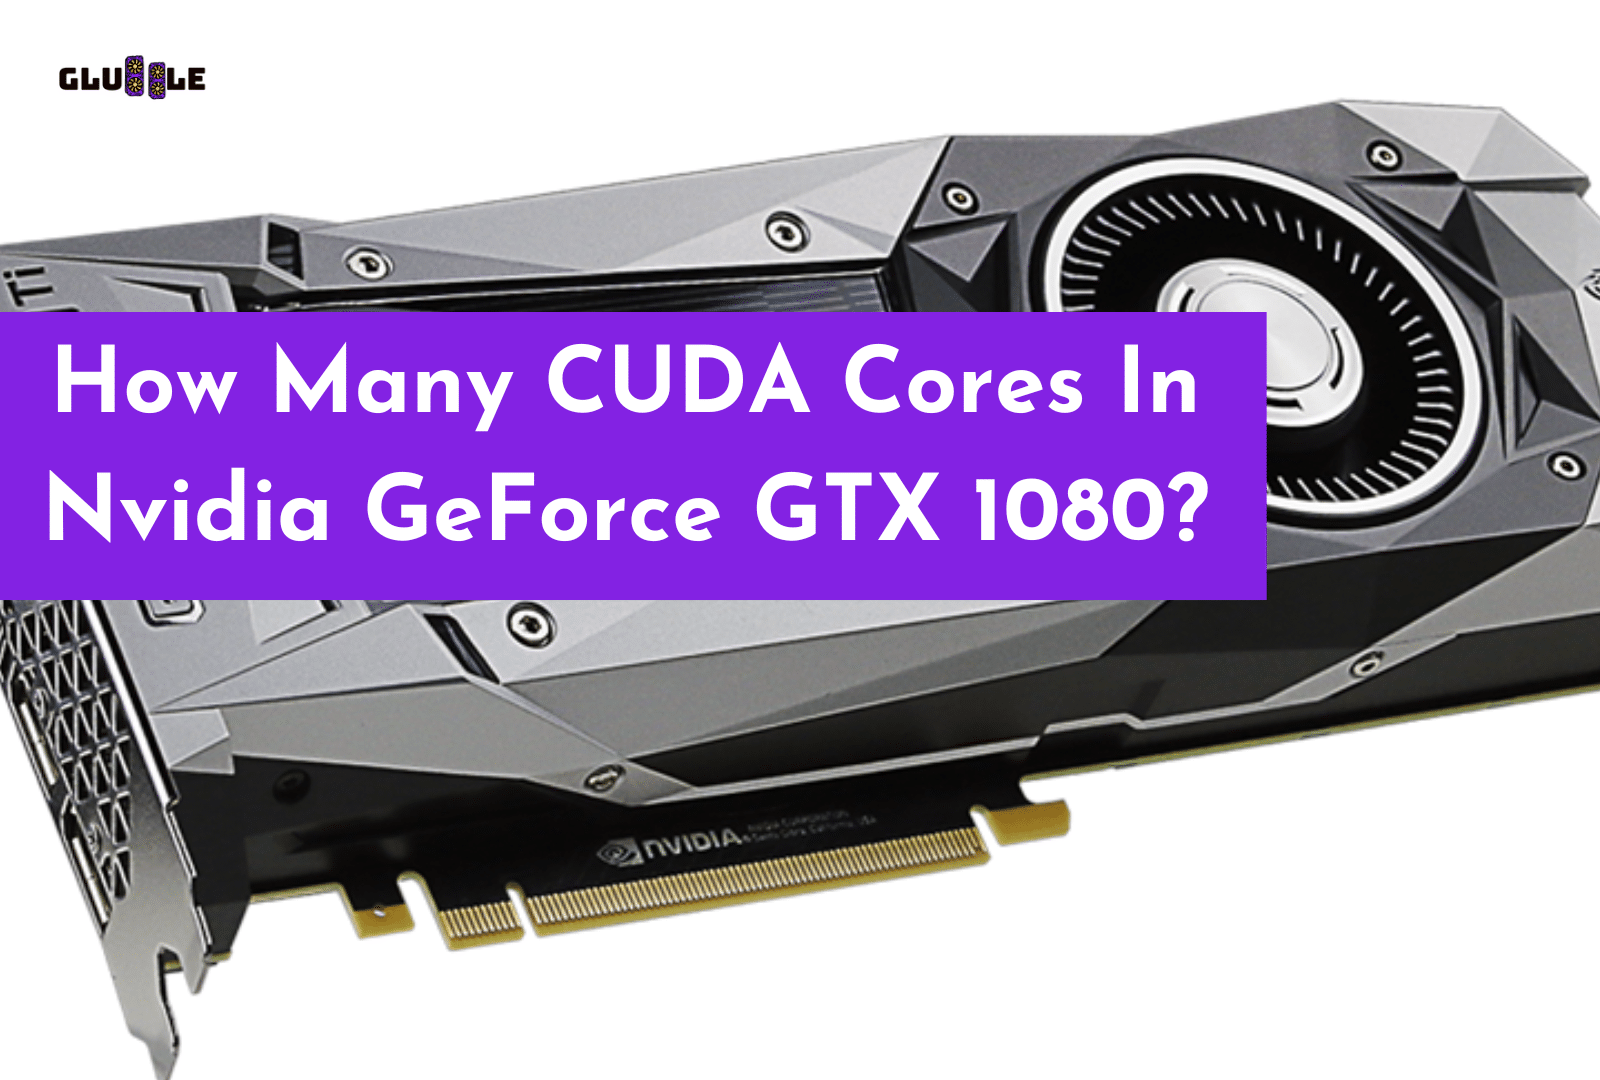 C:\Users\Mohsin\Downloads\How Many CUDA Cores In Nvidia GeForce GTX 1080.png